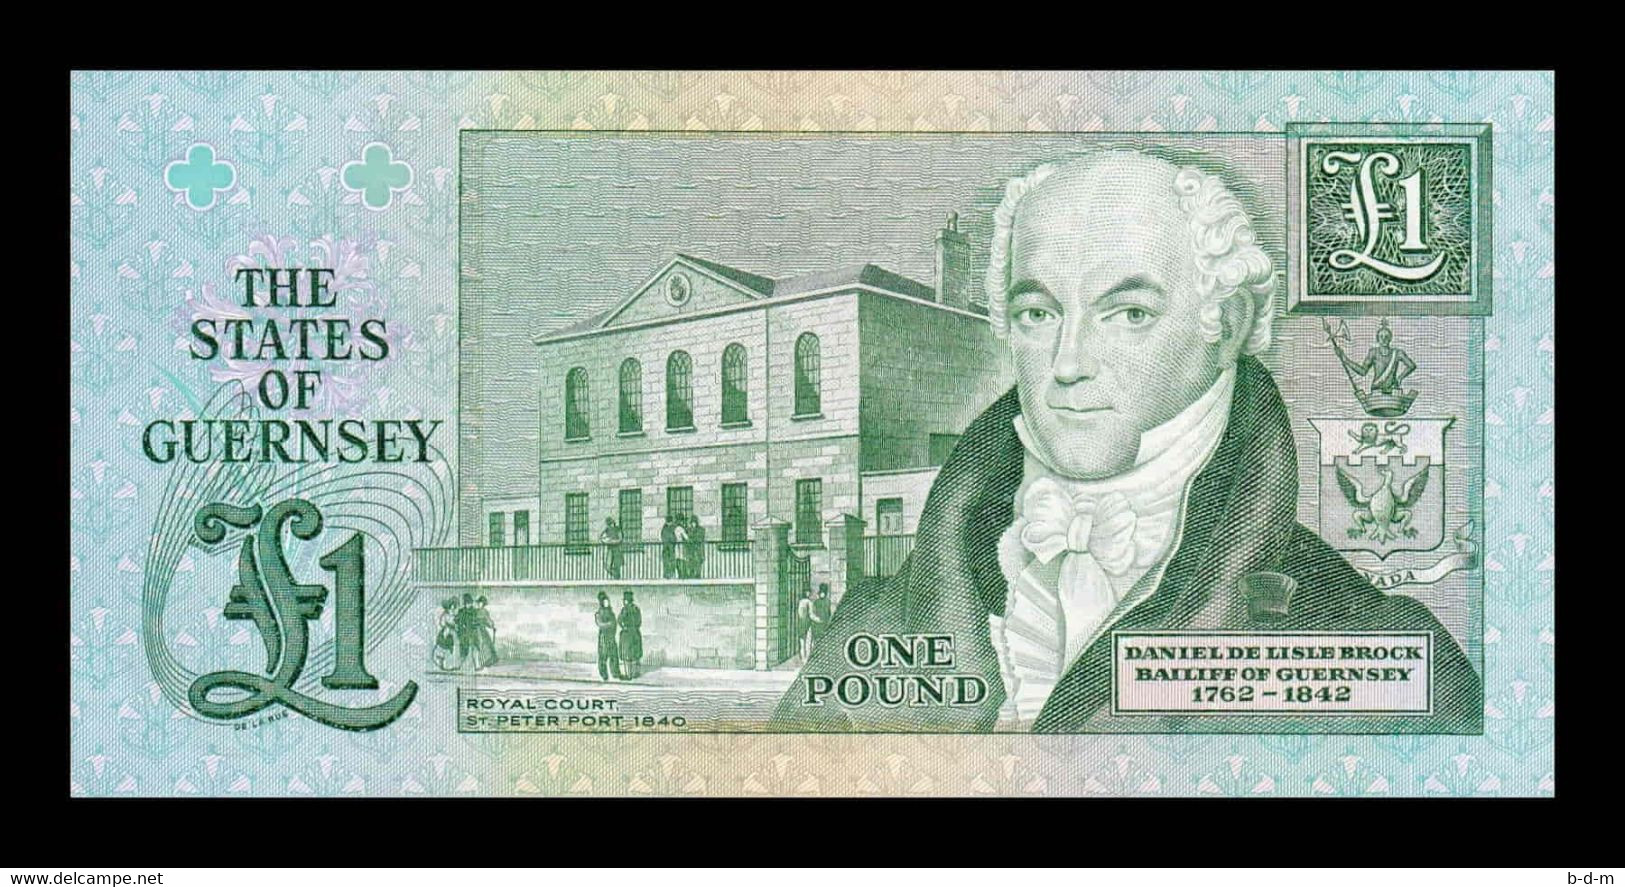 Guernsey 1 Pound 1980 Pick 48a Low Serial SC UNC - Guernsey